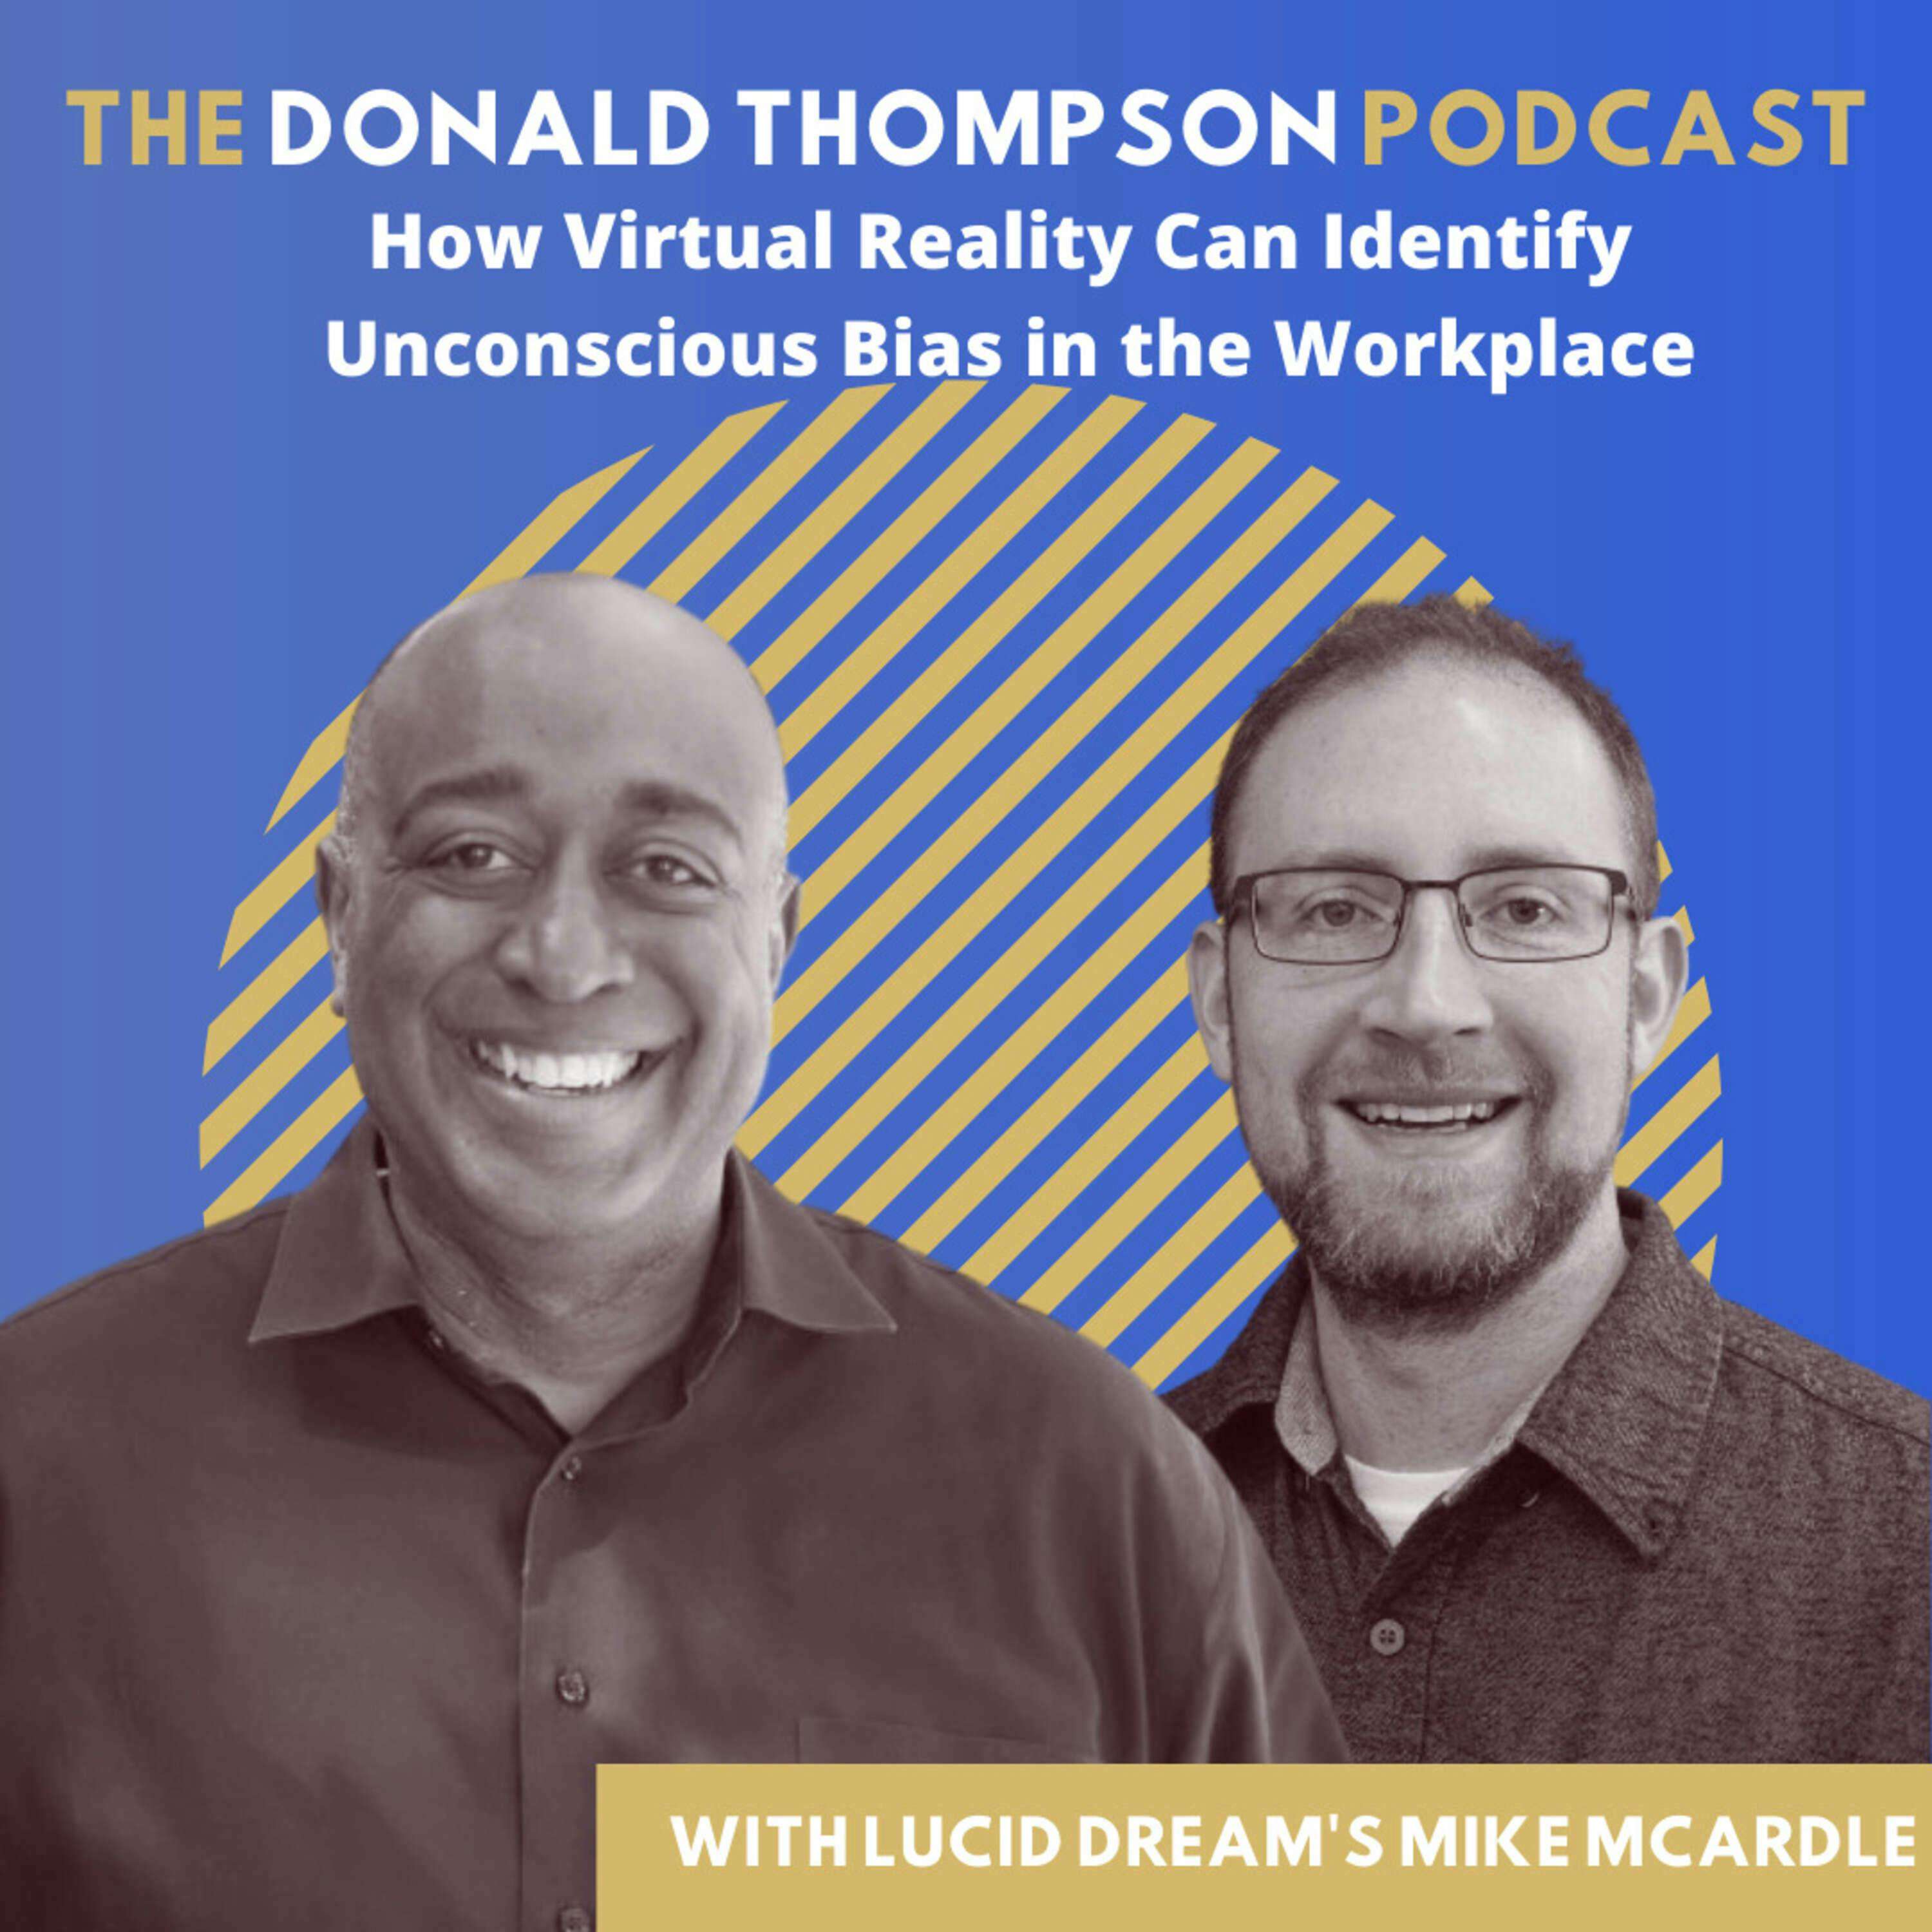 How Virtual Reality Can Identify Unconscious Bias in the Workplace, with Lucid Dream's Mike McArdle